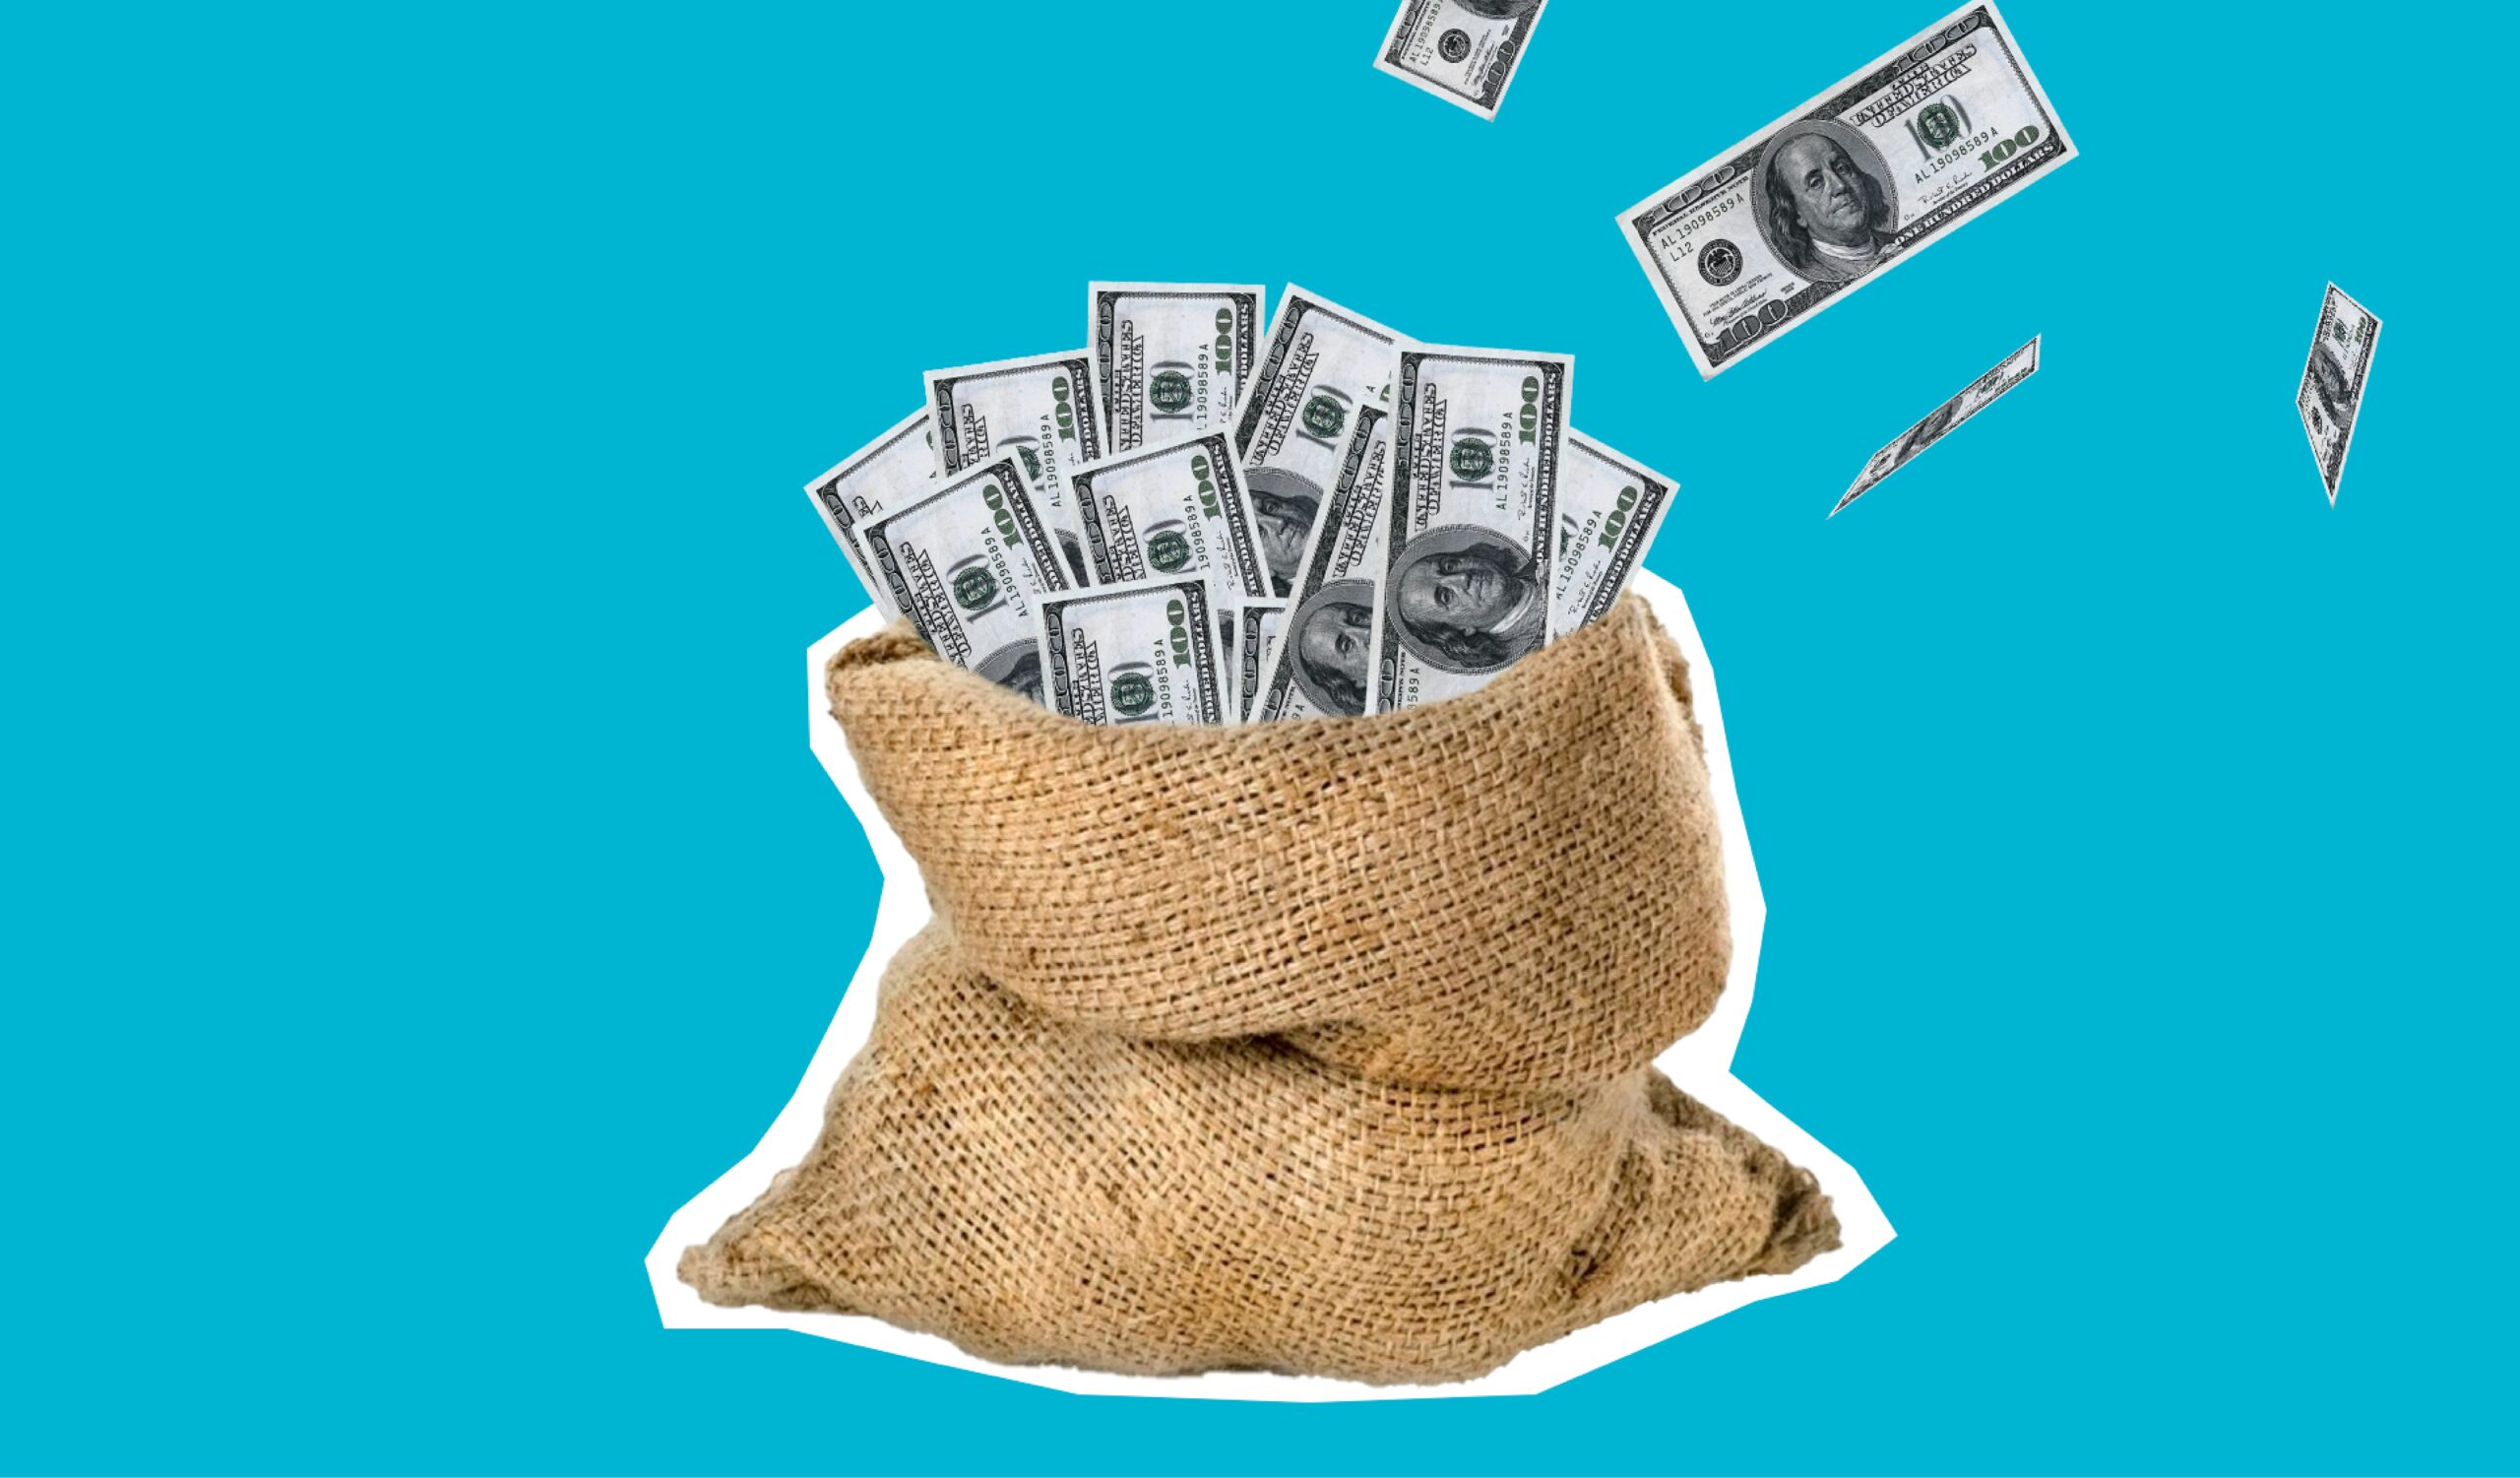 A sack filled with money in front of a blue background.